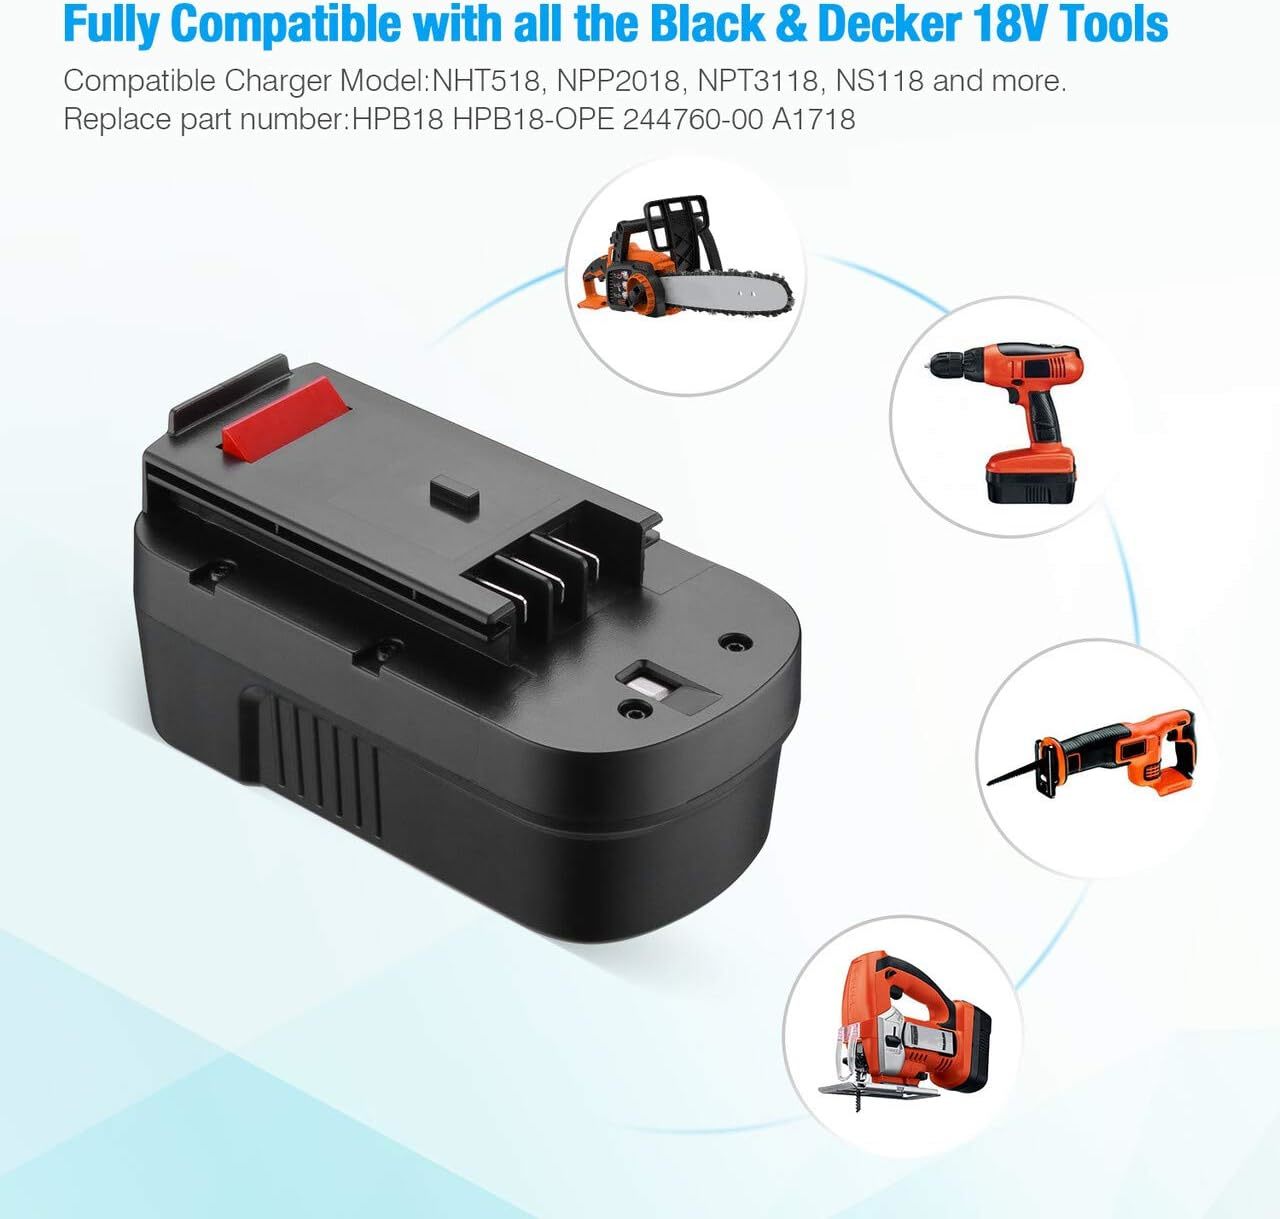 Black And Decker Hpb18 Hpb18-Ope 244760-00 and 50 similar items